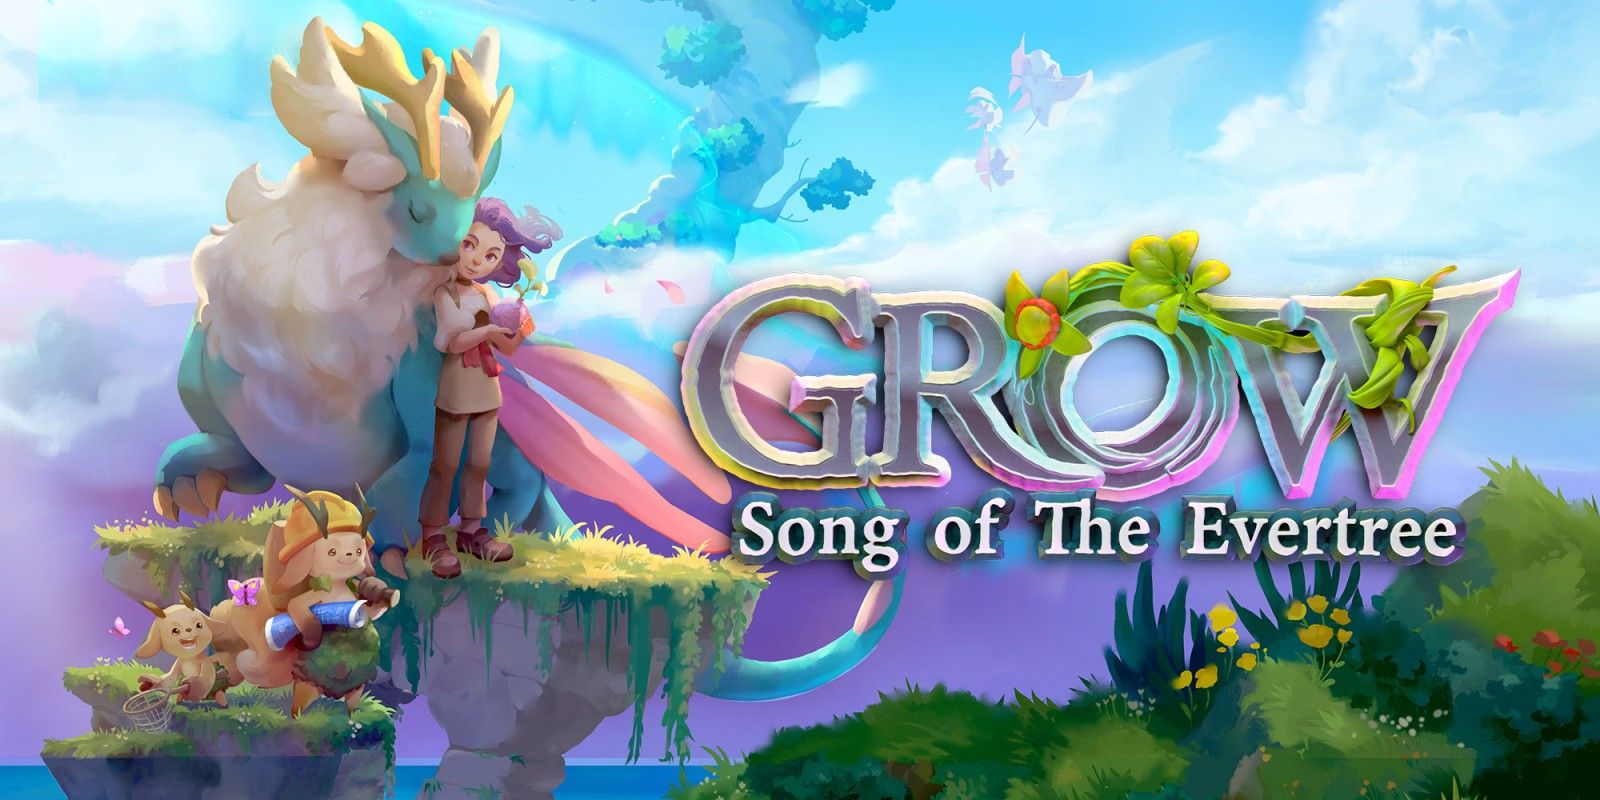 Main character from Gros: Song of the Evertree surrounded by fantasy creatures